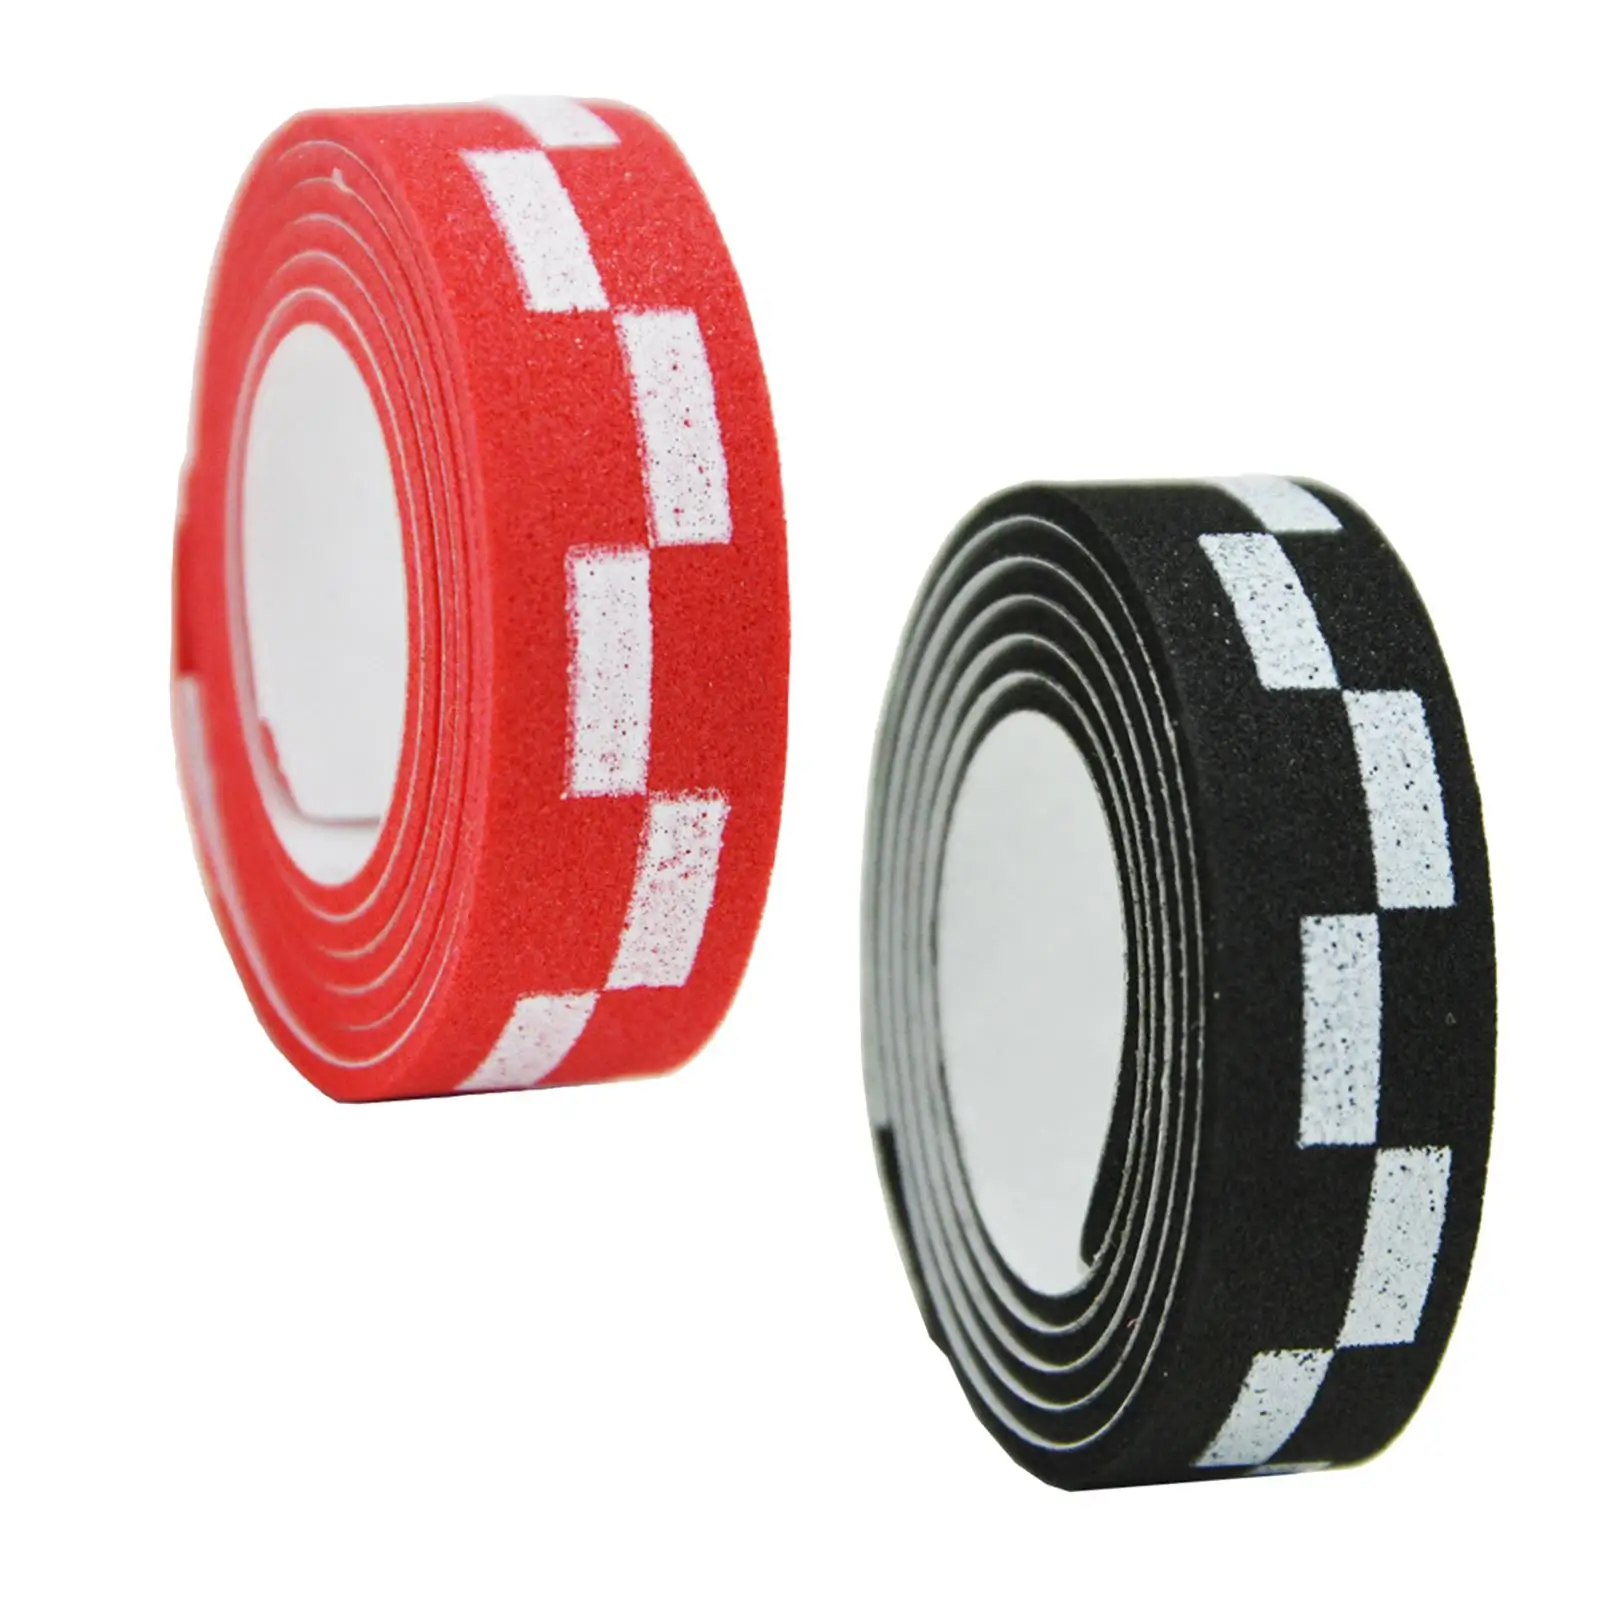 Edging tape for table tennis bats, care for table tennis bats, 10 mm